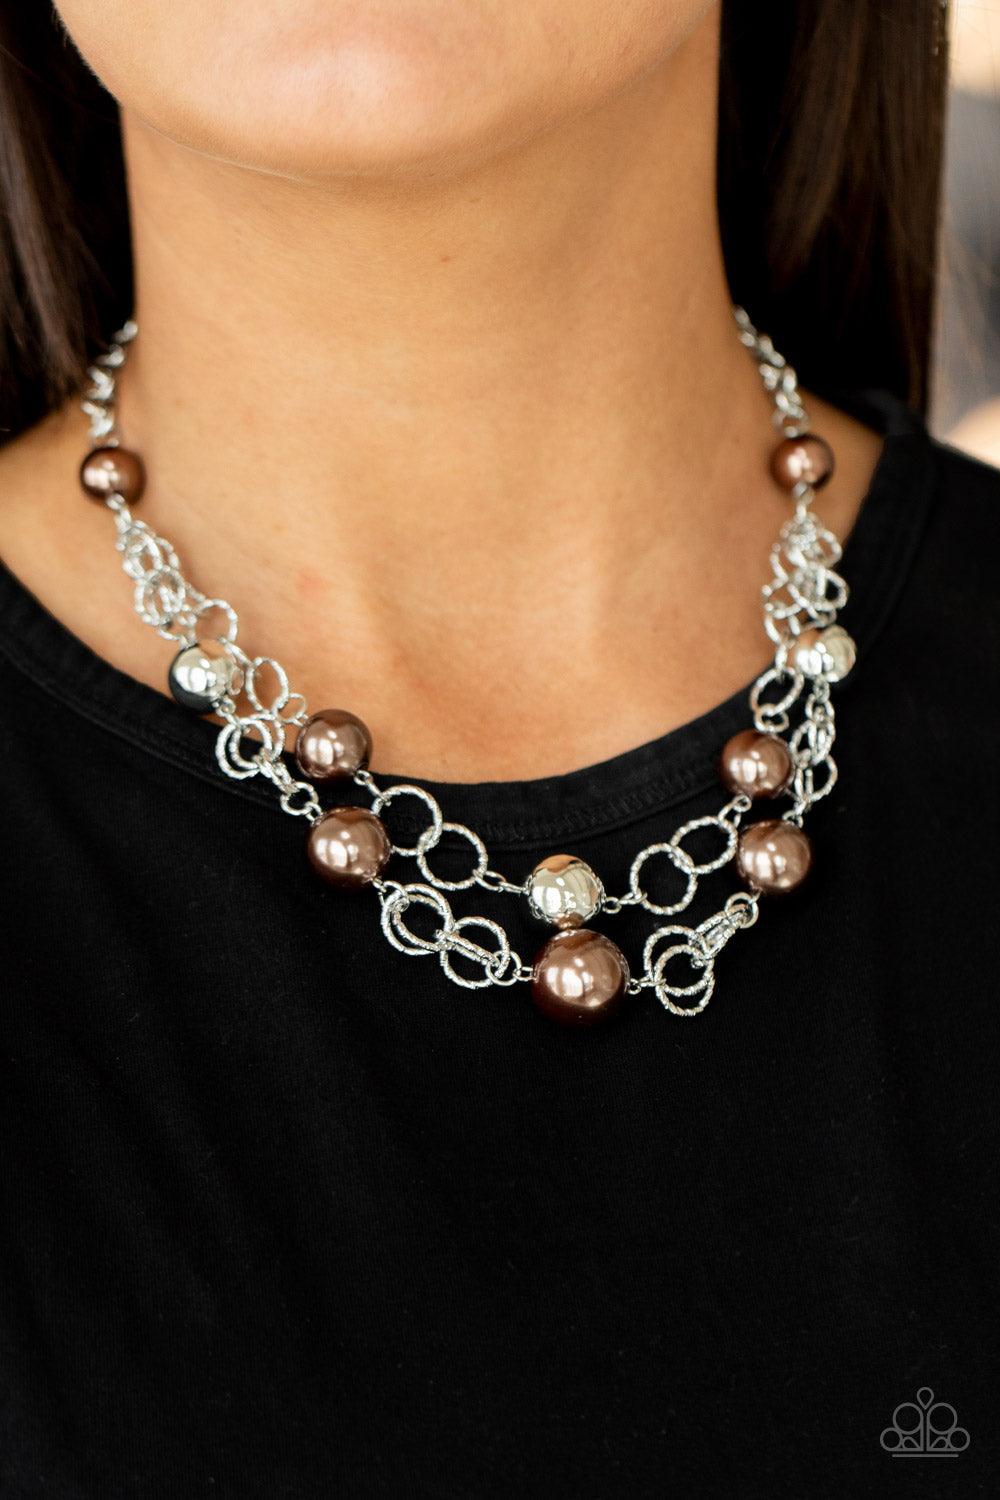 Paparazzi Accessories New Age Knockout - Brown Sections of oversized textured silver links, brown pearls, and shiny silver beads haphazardly connect into two timeless layers below the collar, creating a dramatically refined display. Features an adjustable